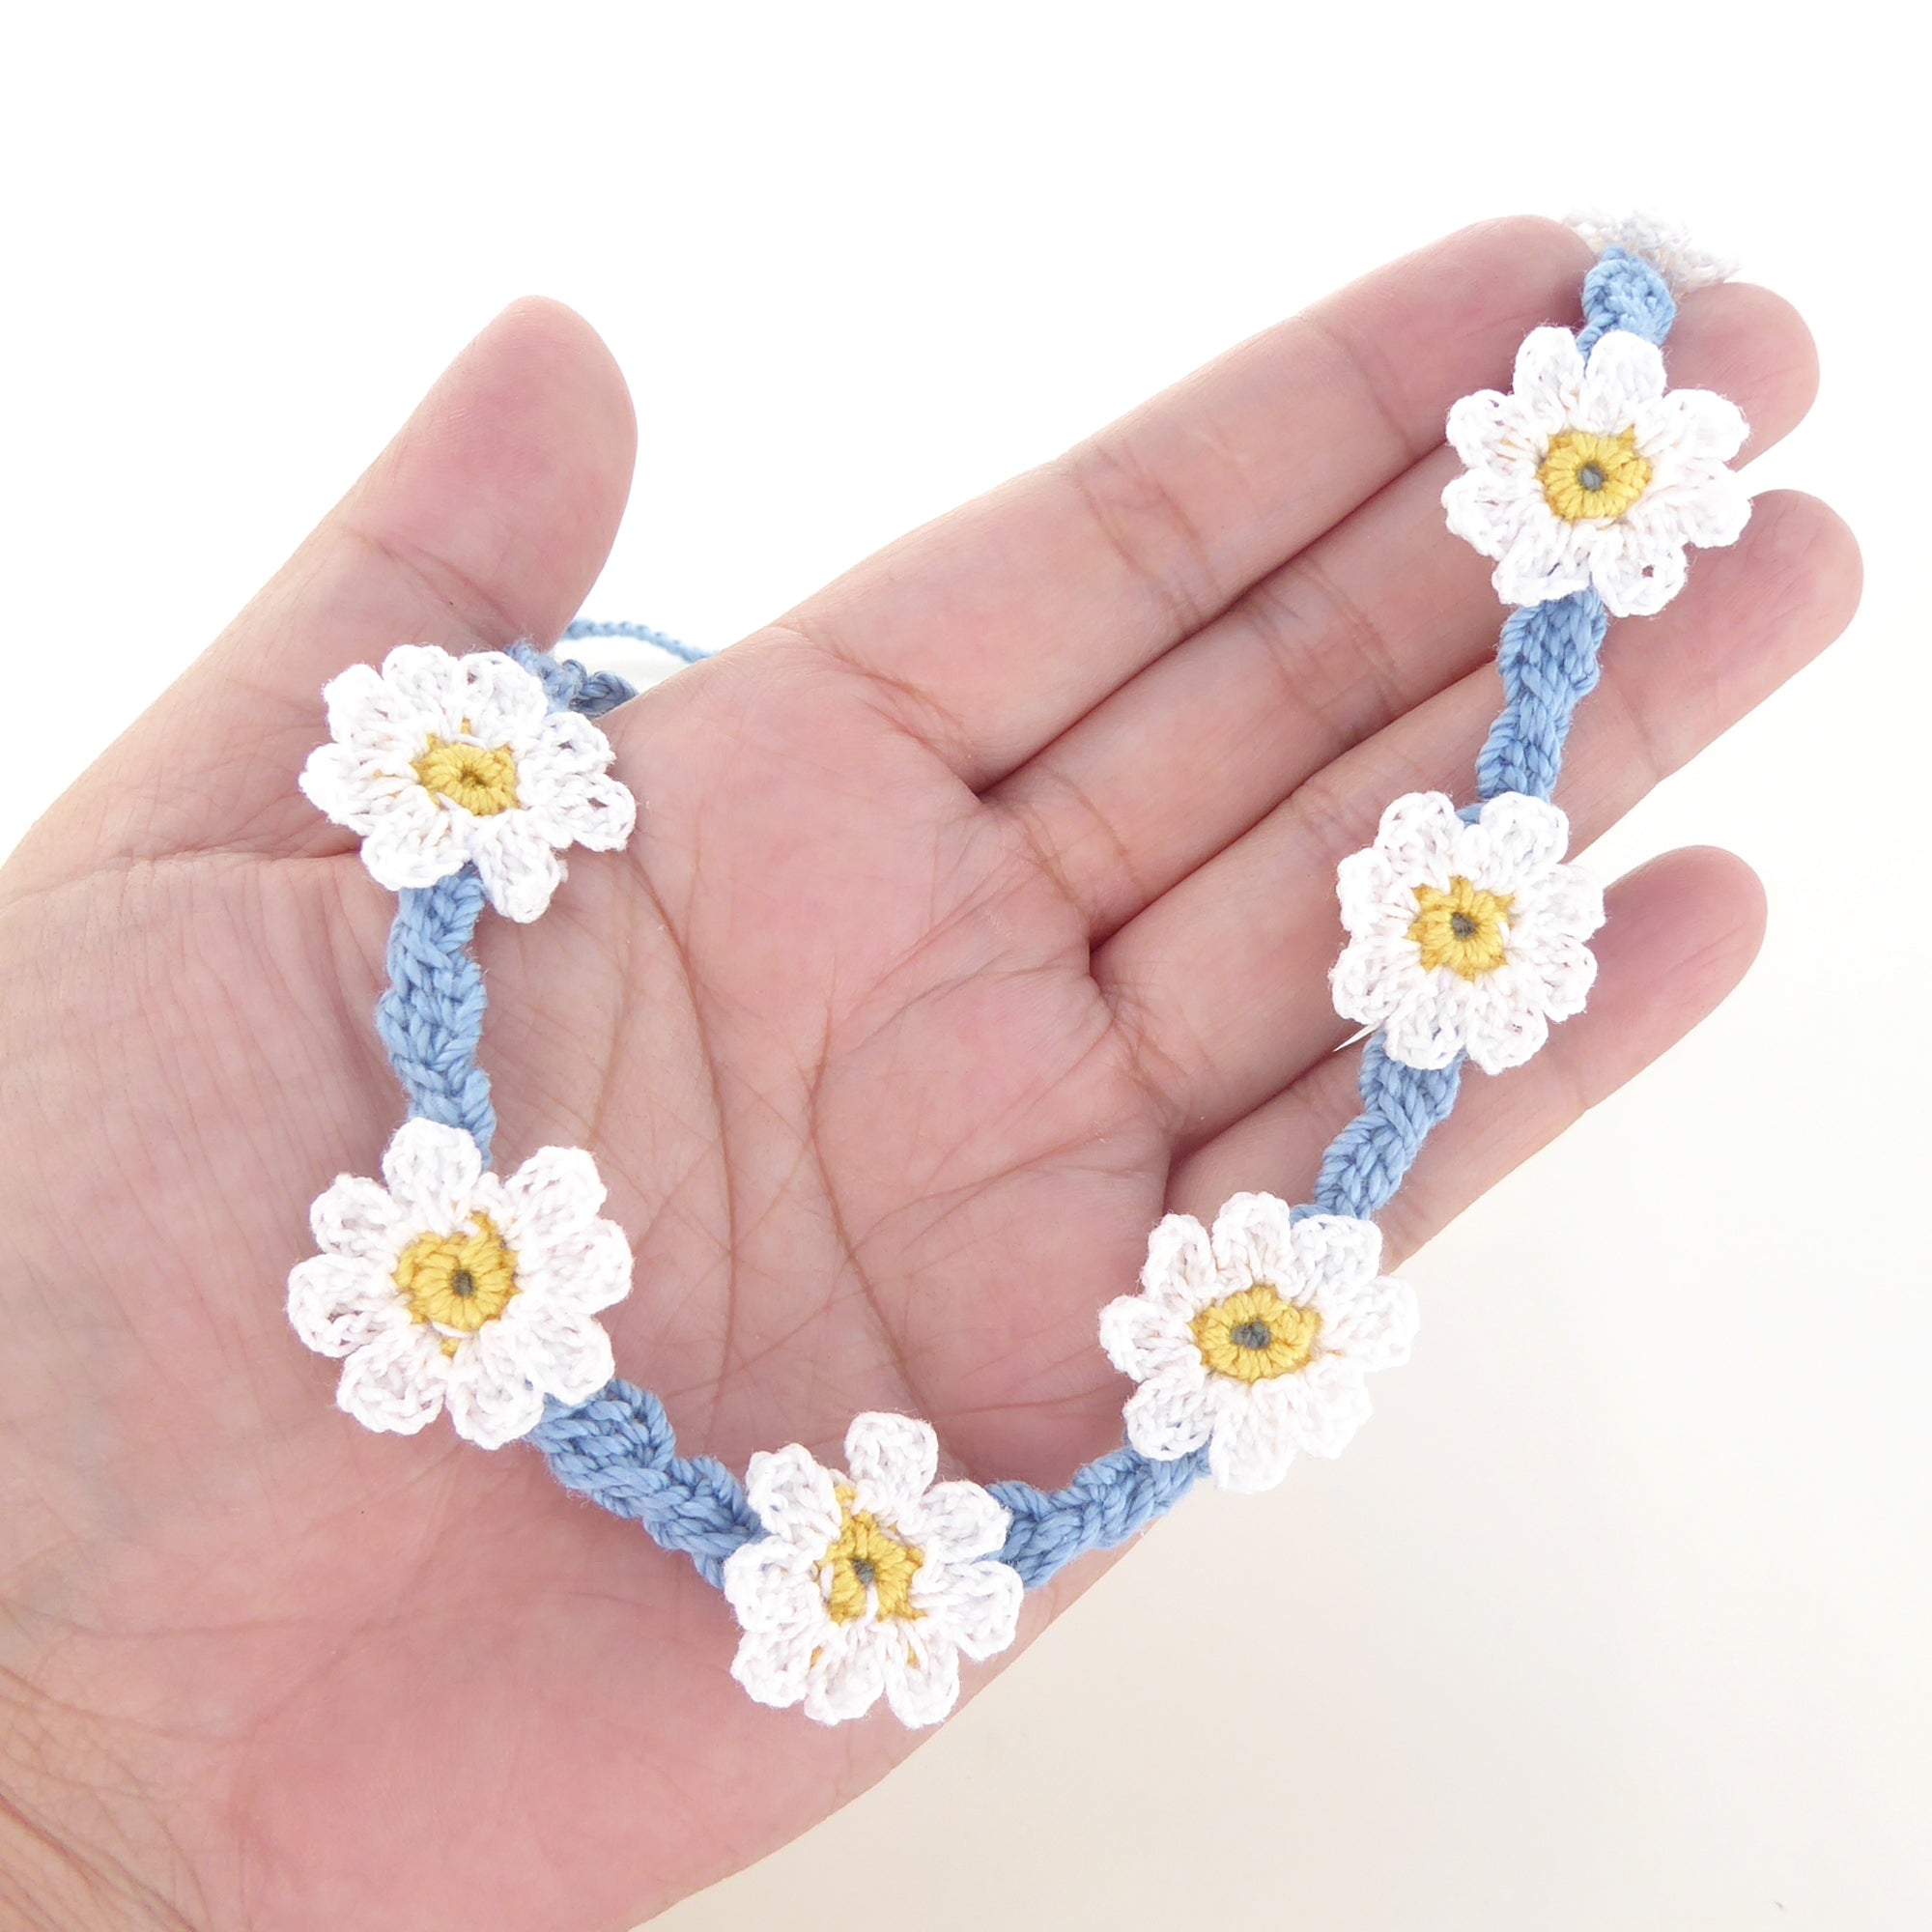 Blue and white flower crochet earring and necklace set by Jenny Dayco 8